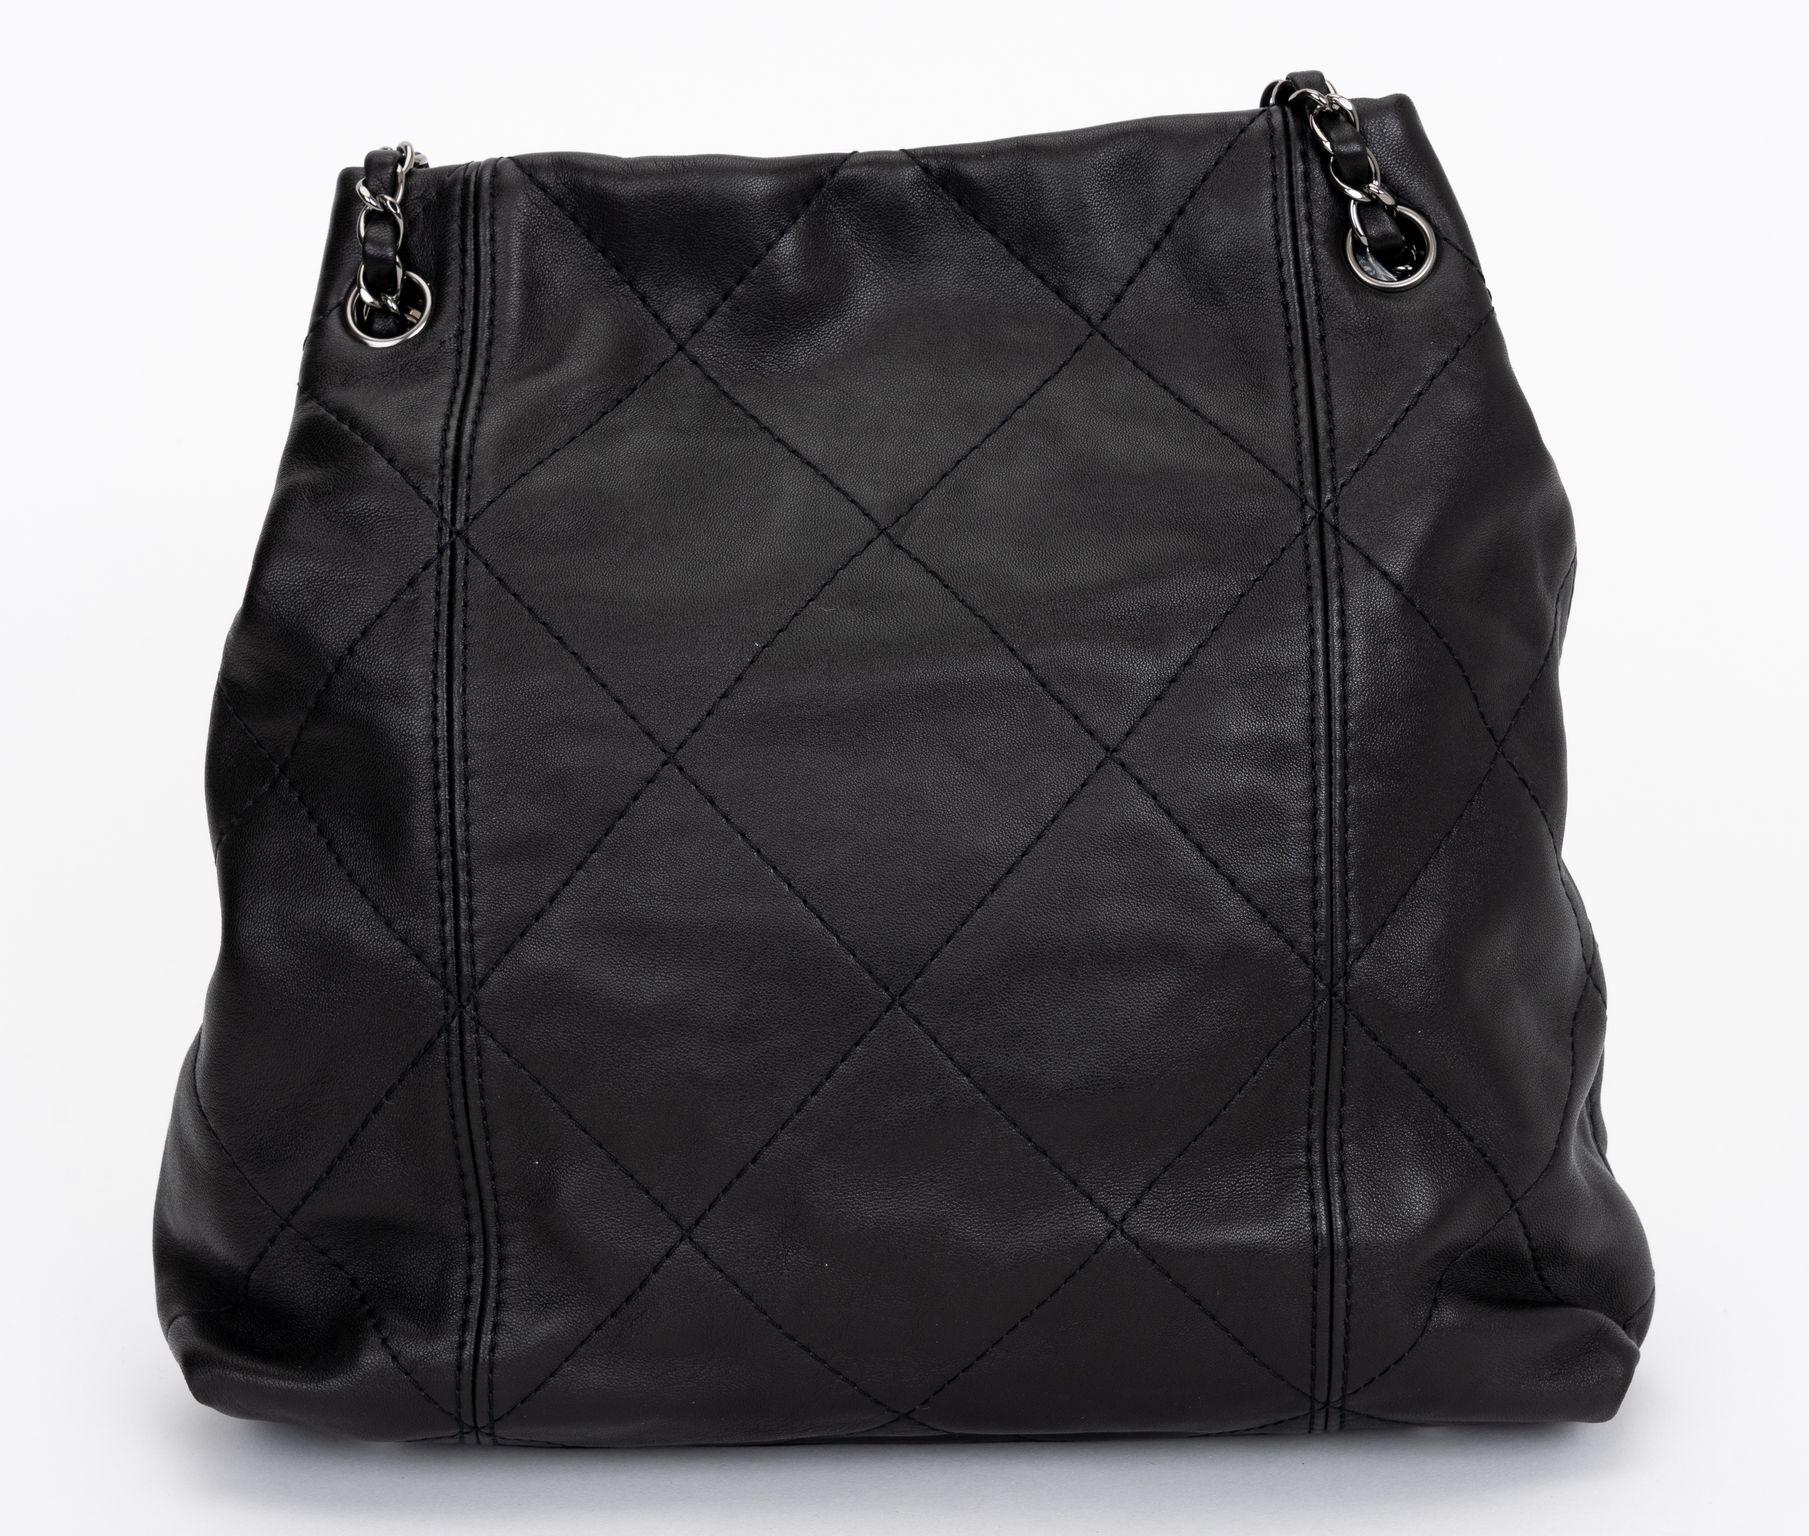 Women's Chanel Black Soft Touch Tote For Sale